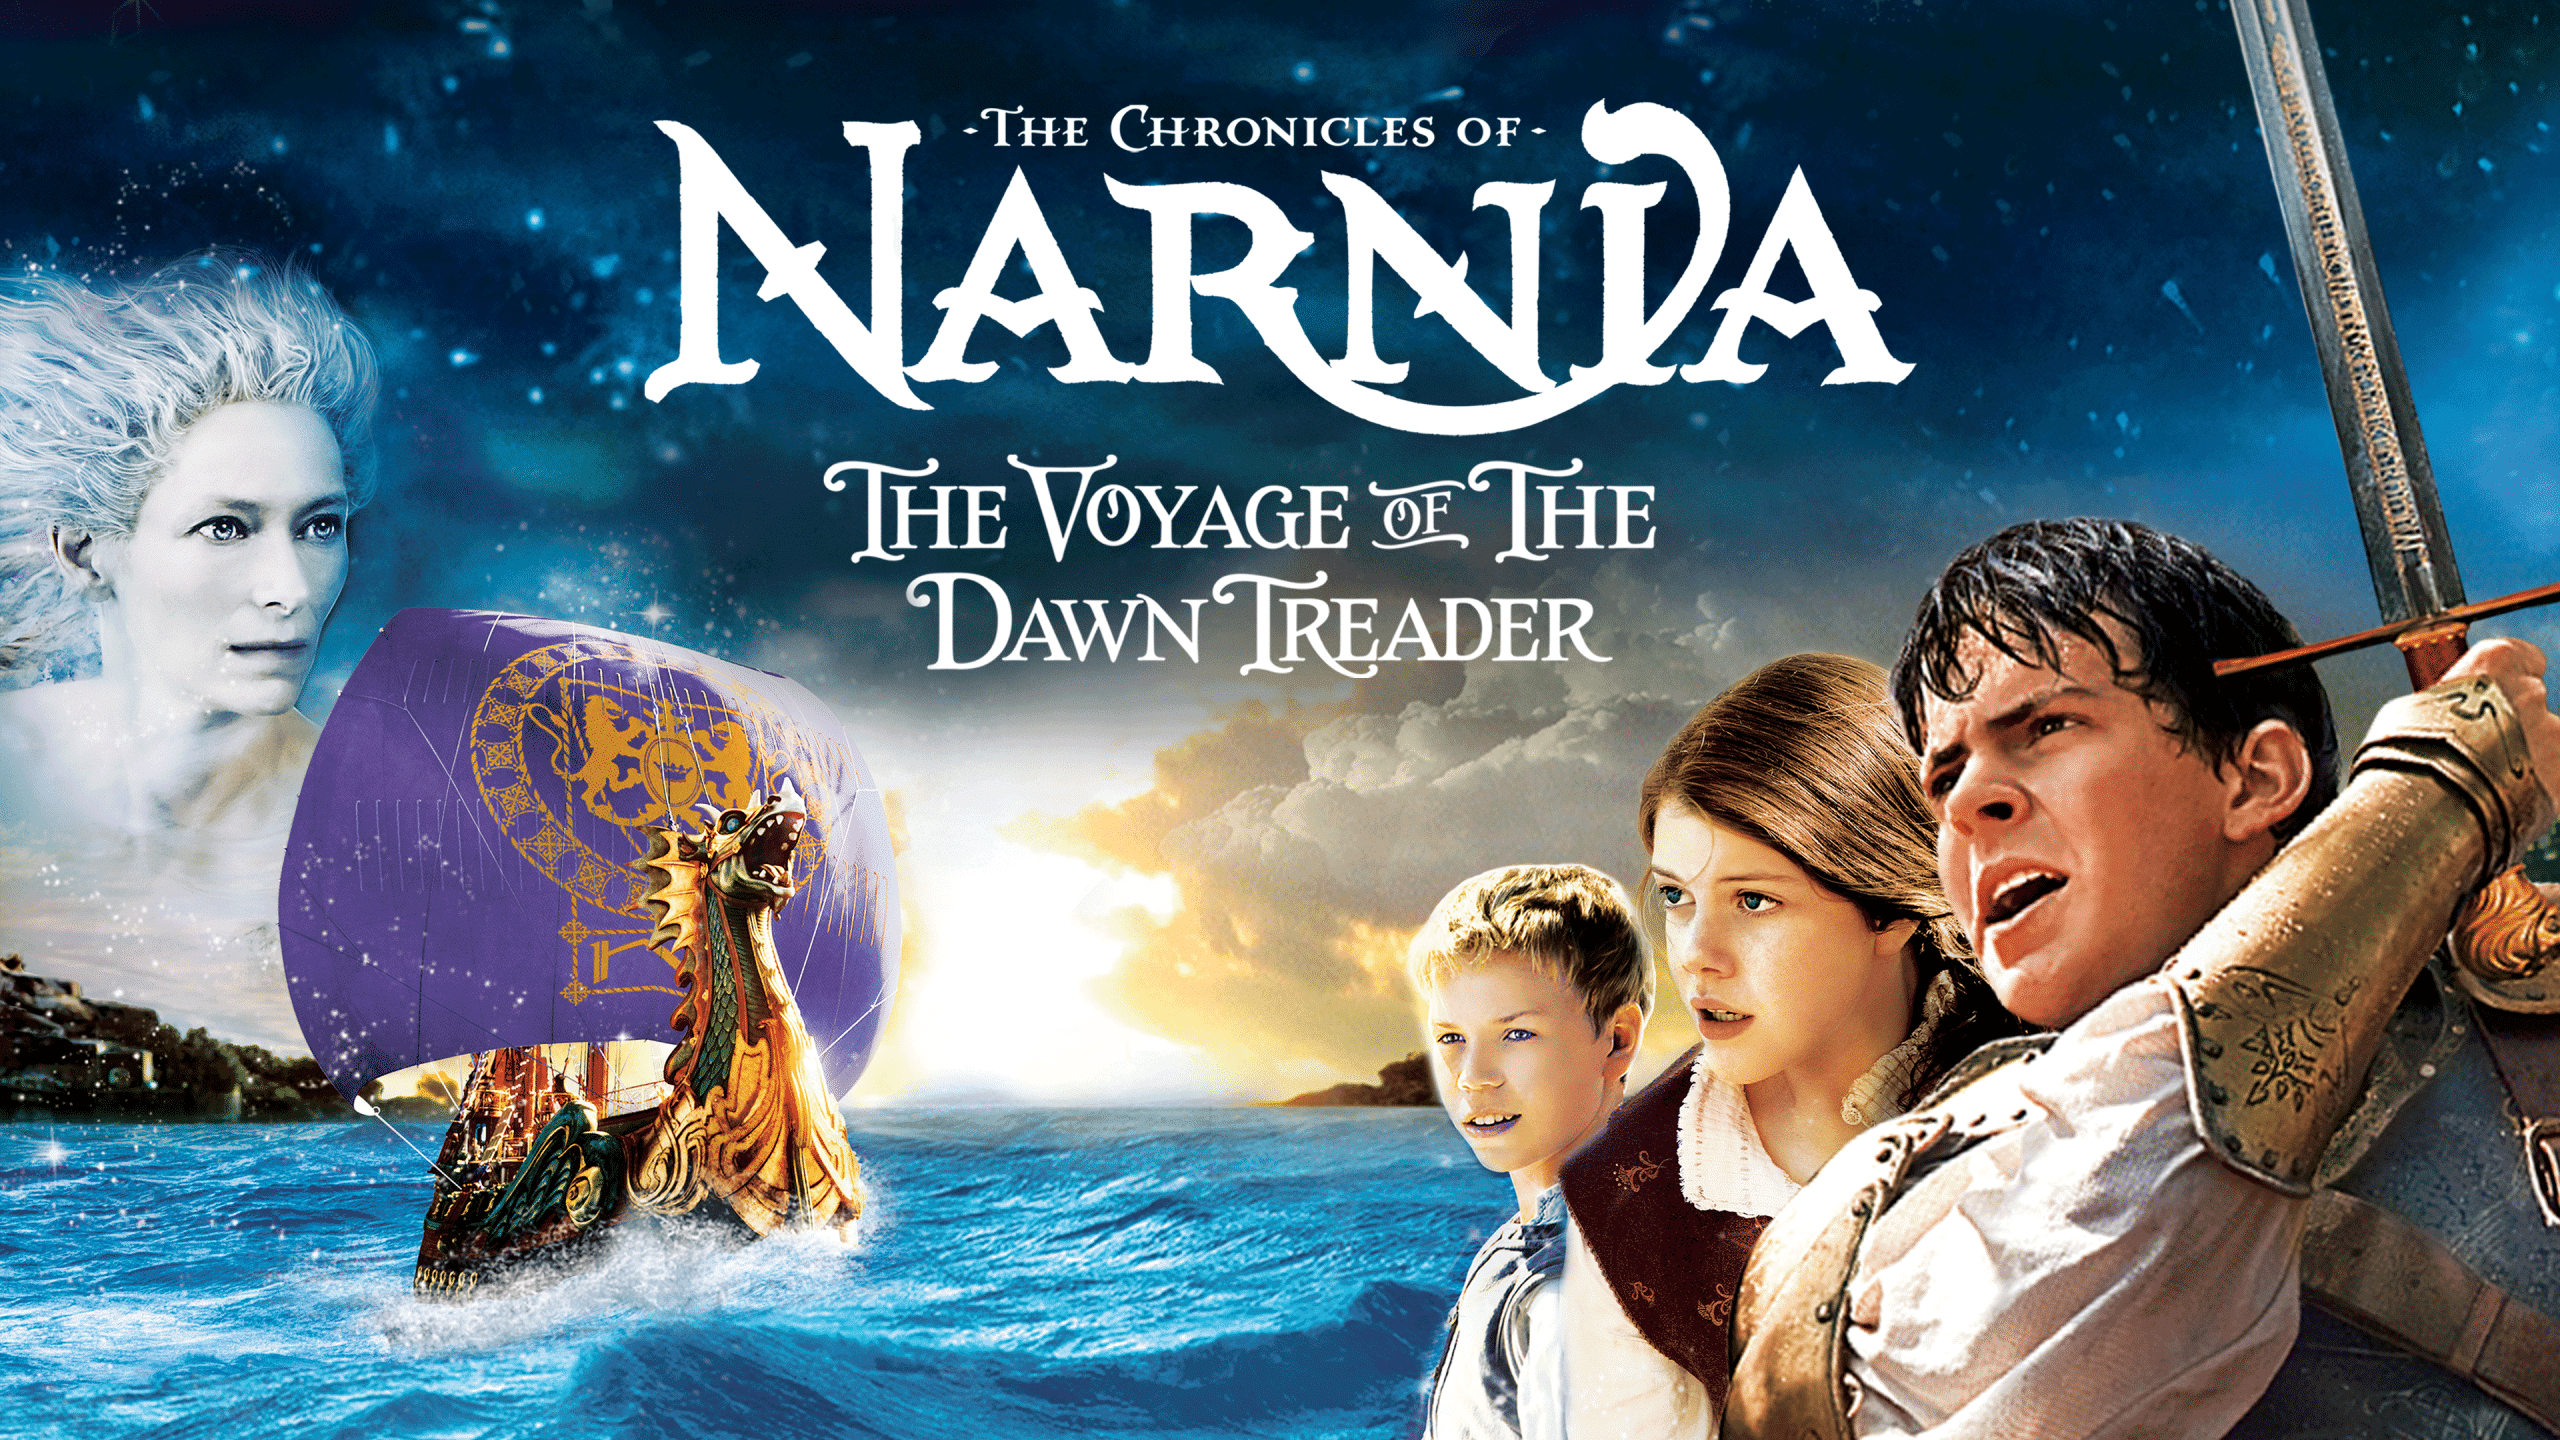 voyage of the dawn treader poster